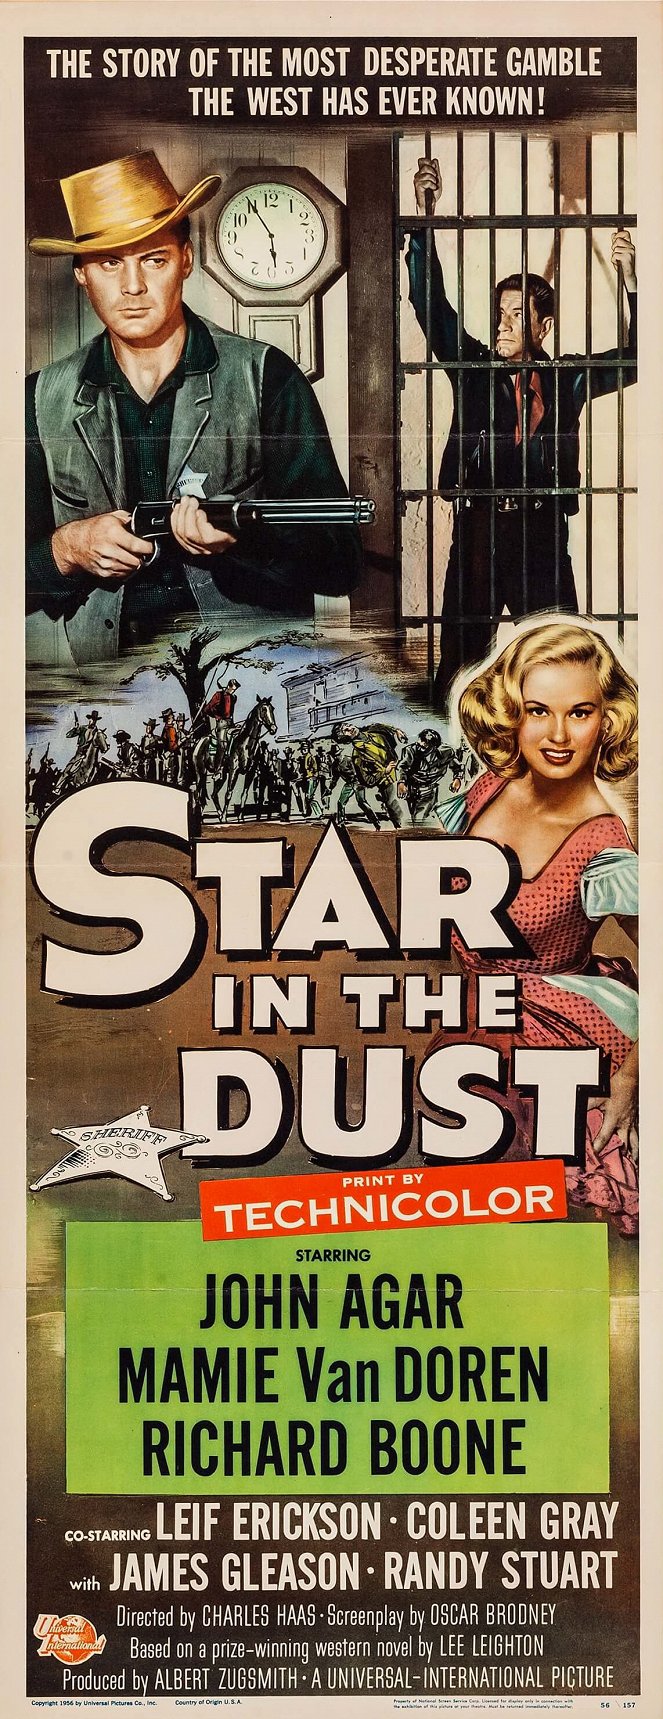 Star in the Dust - Posters